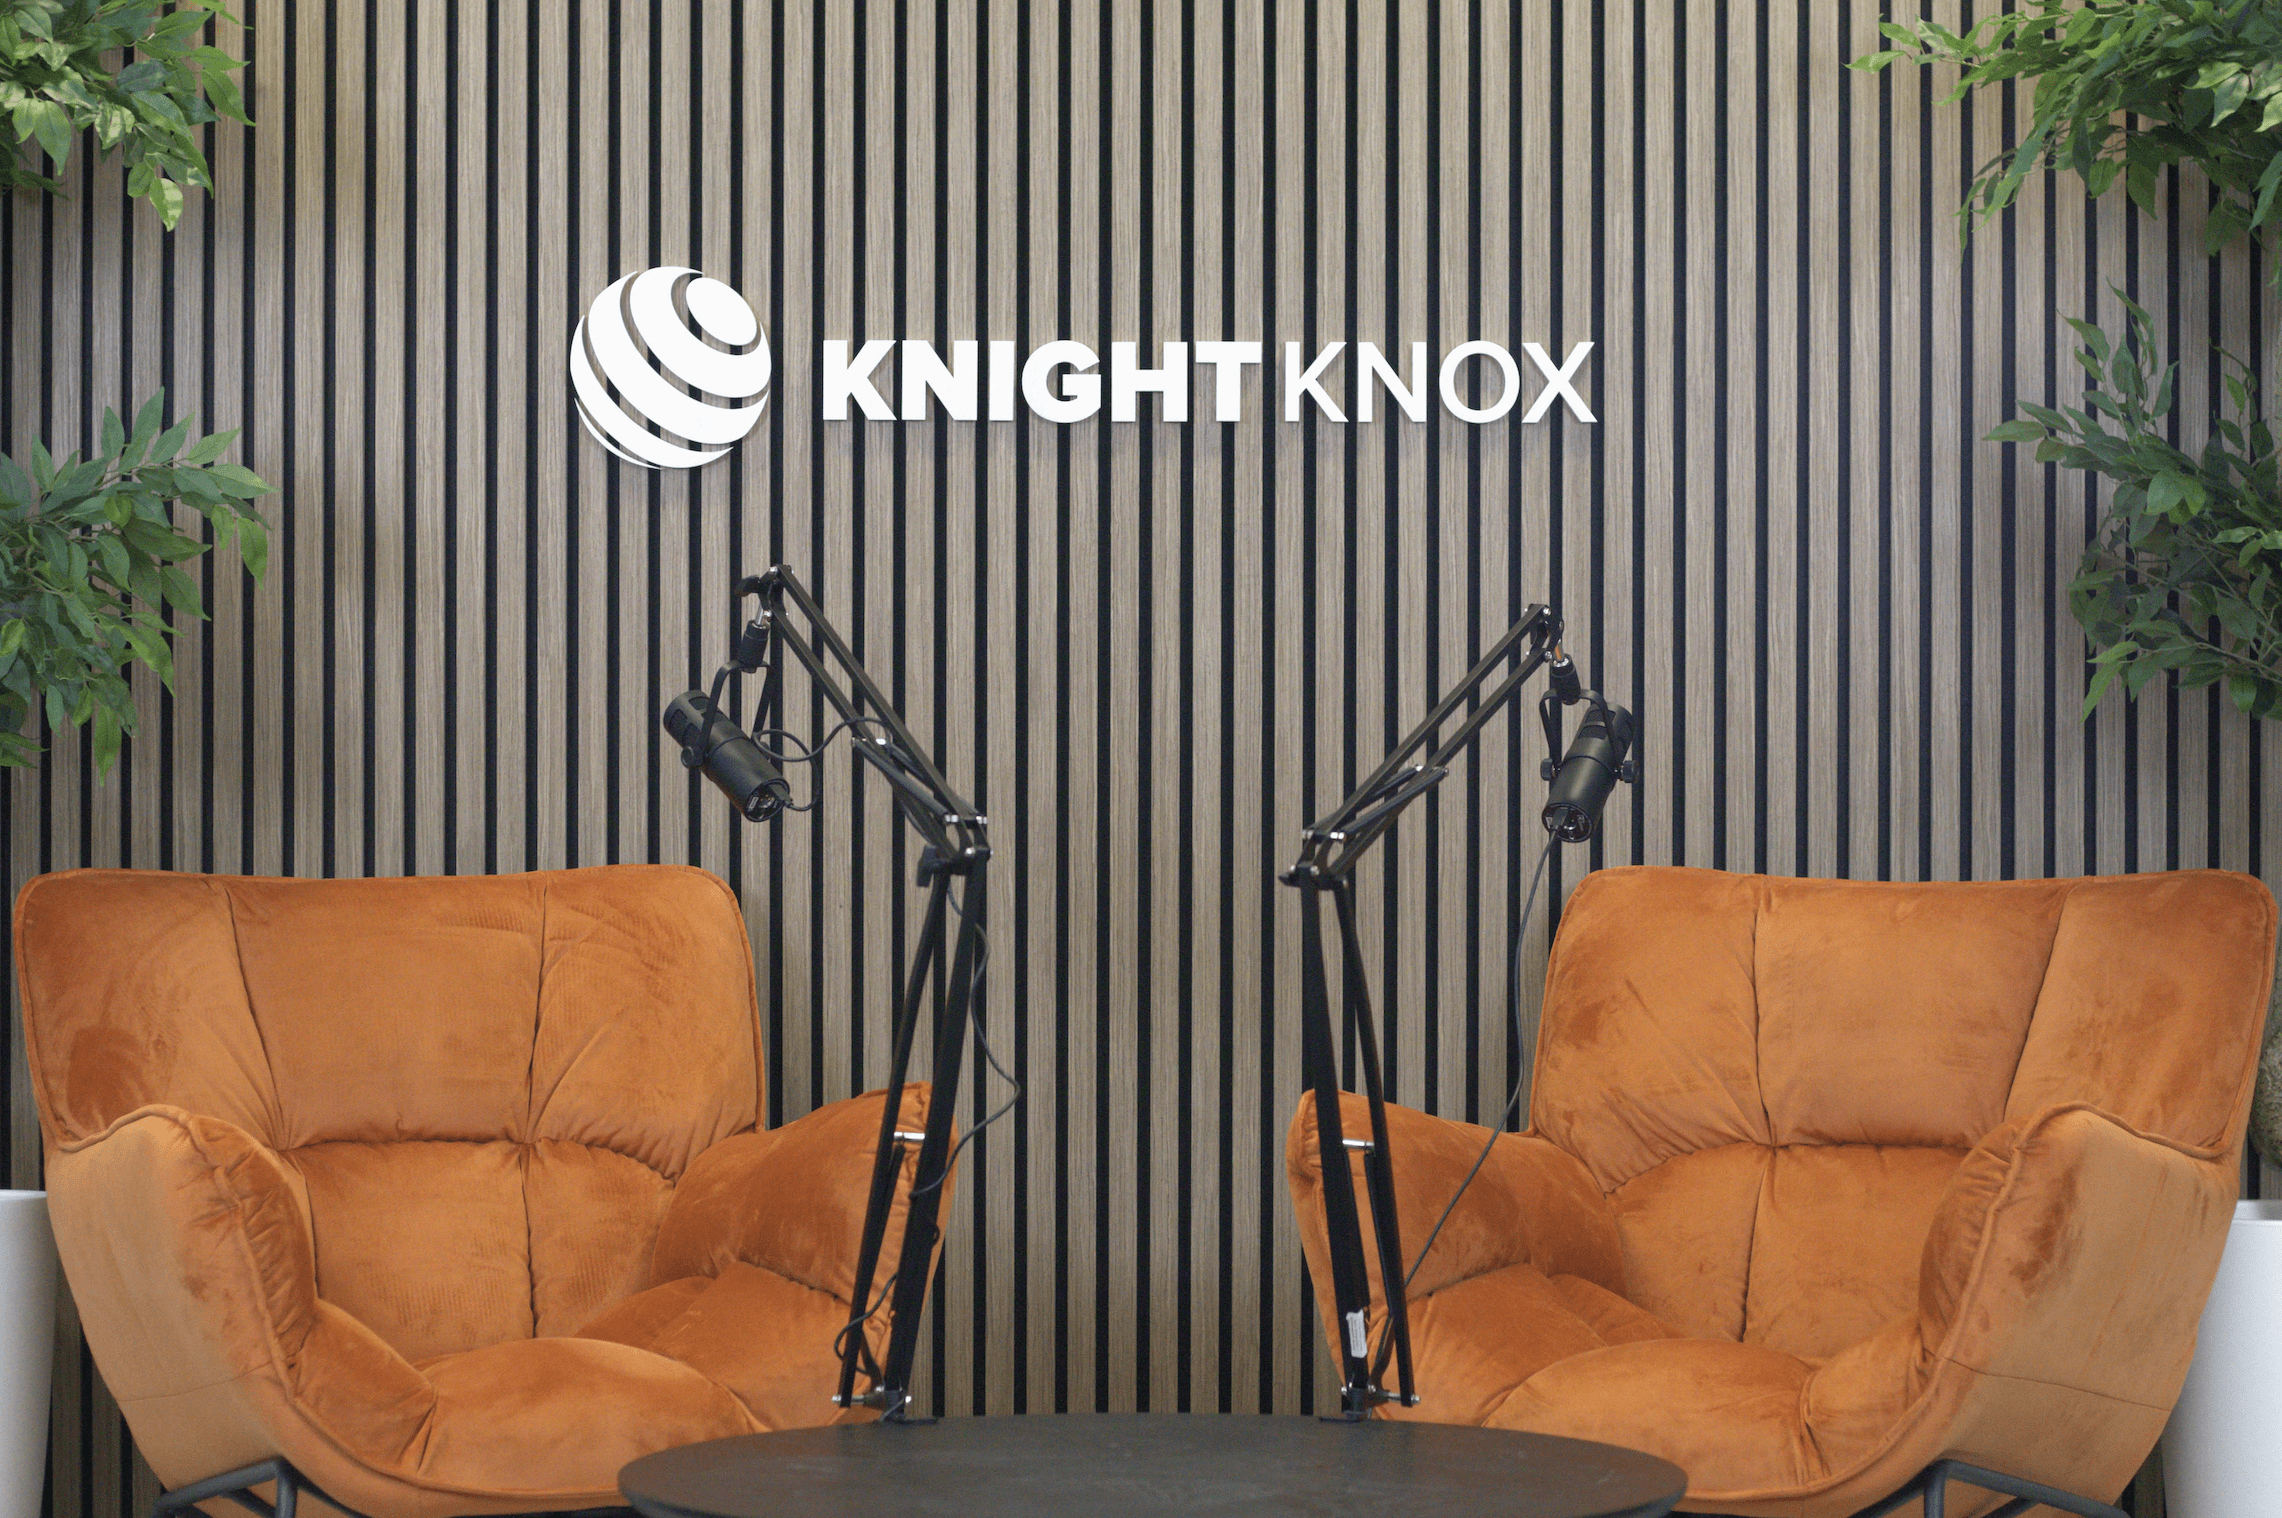 Introducing ‘The Knight Knox Podcast’